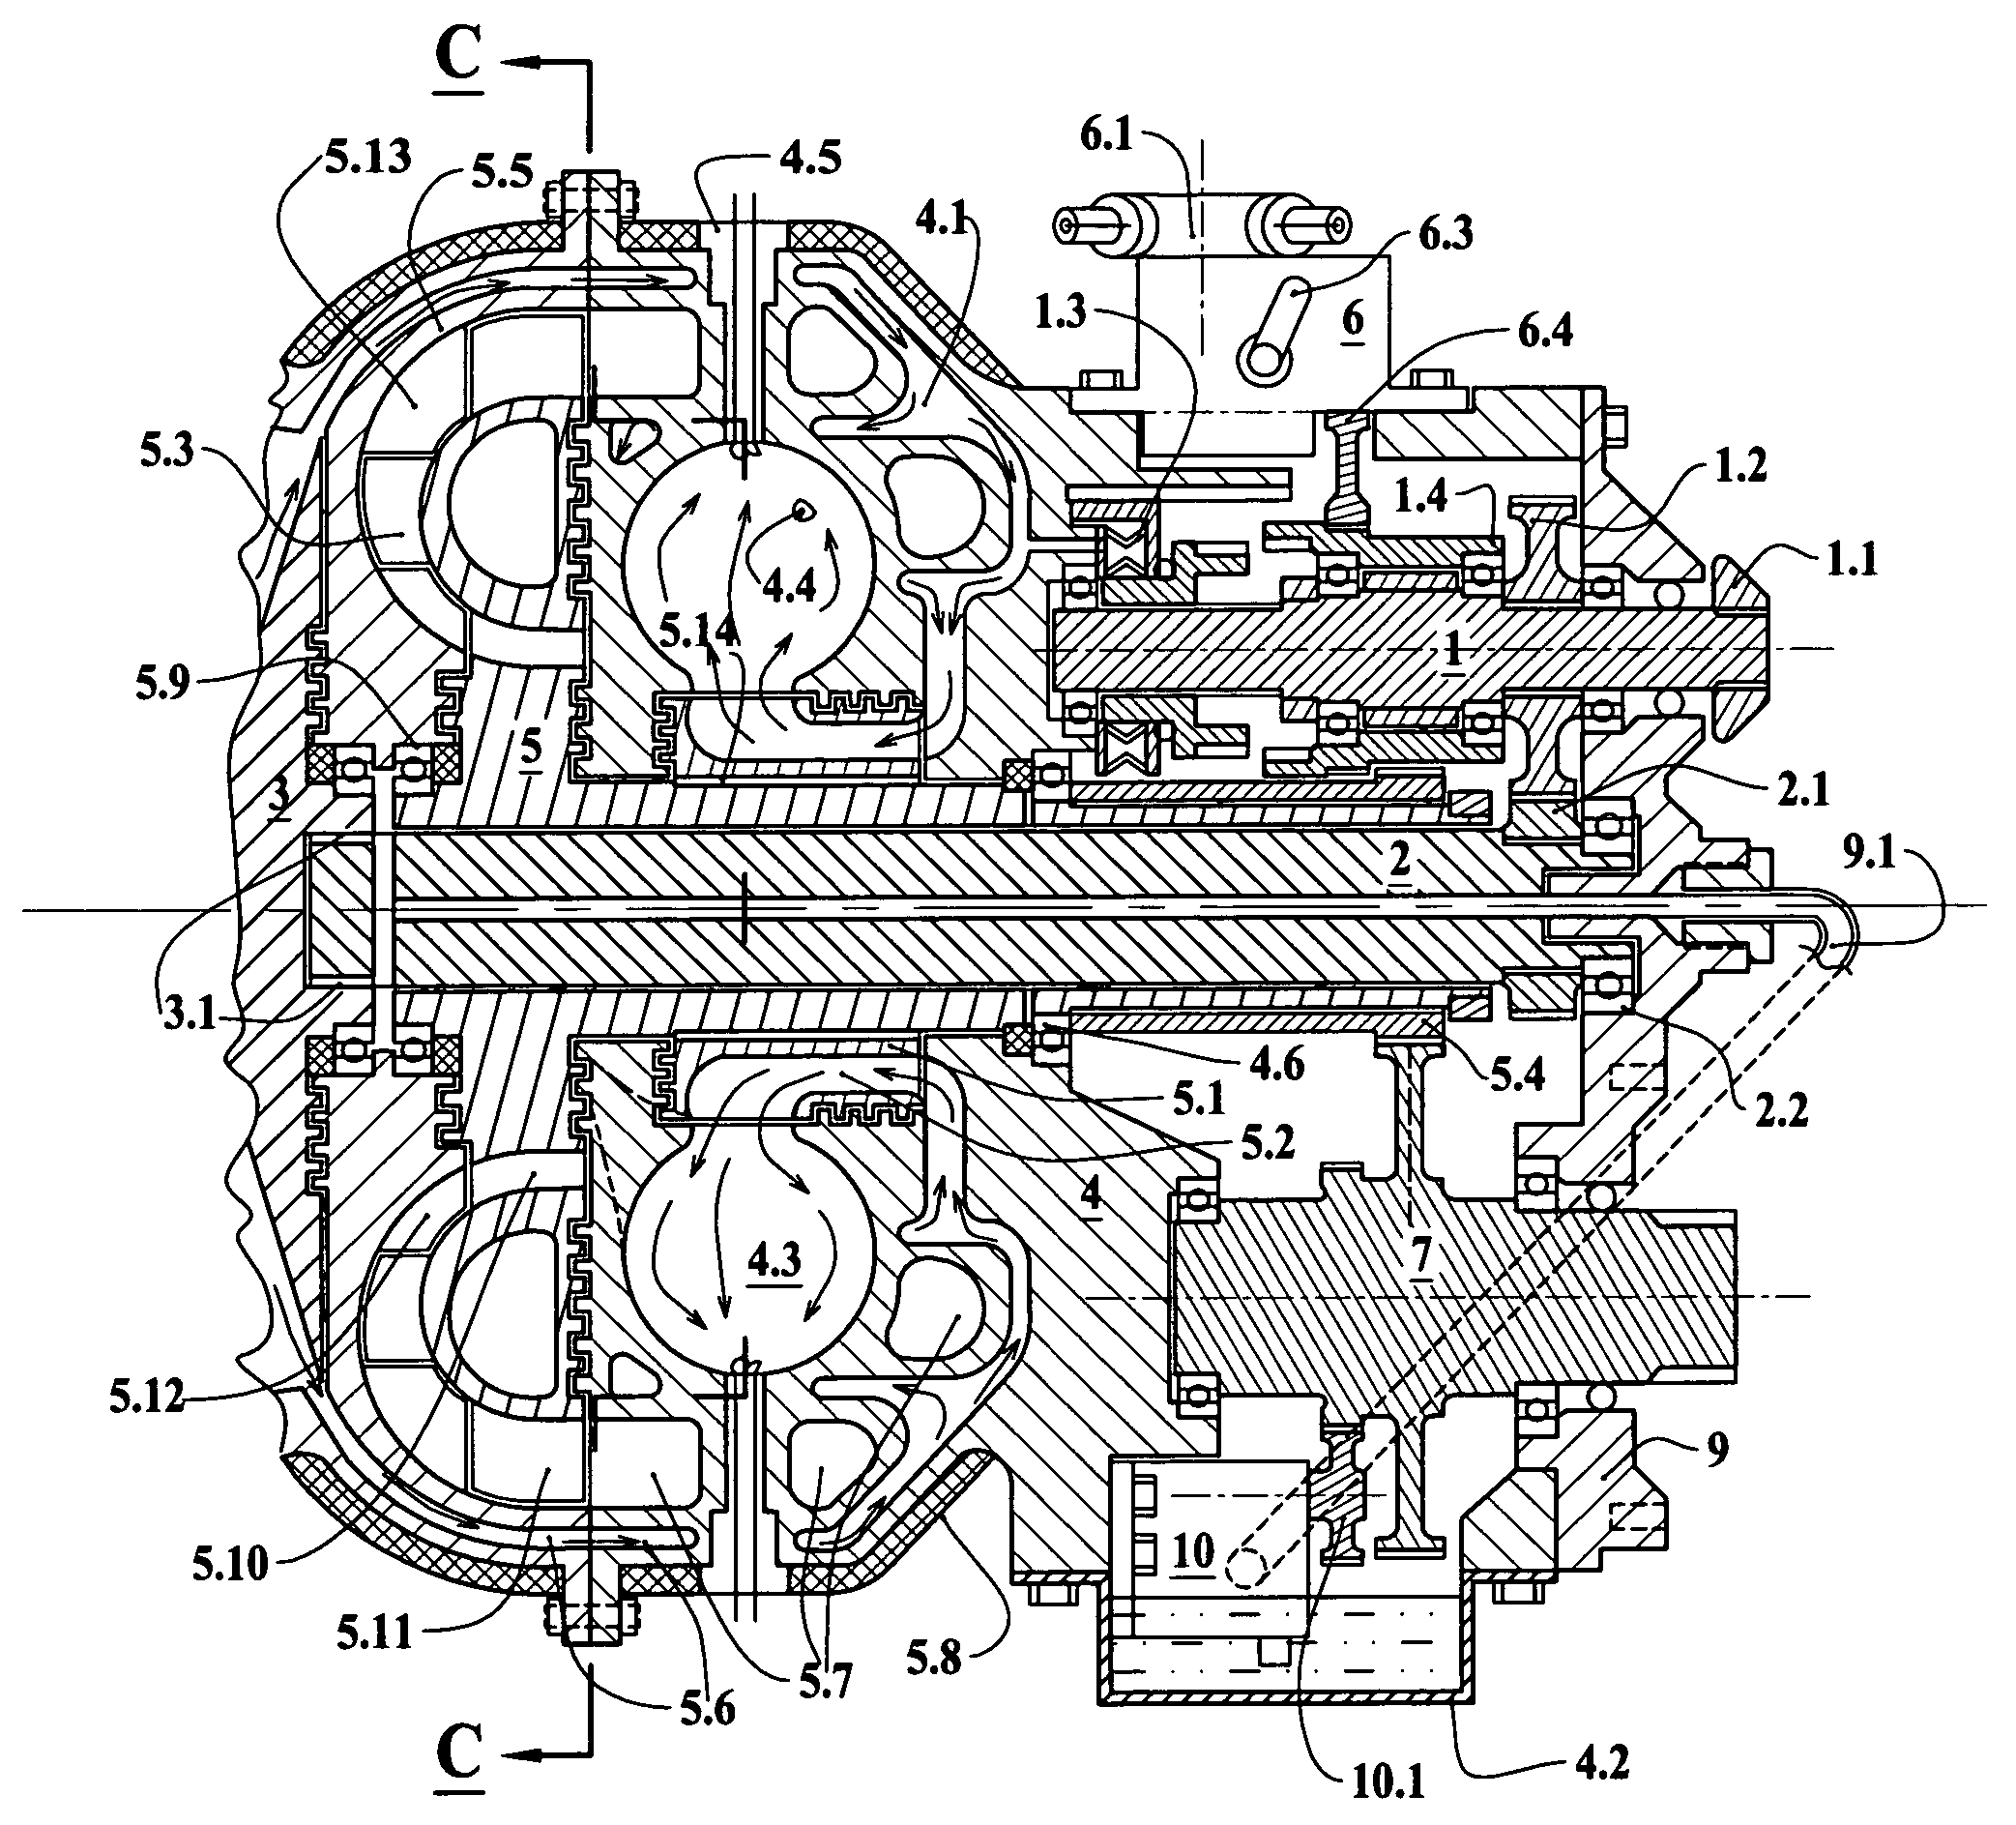 Rotary internal combustion engine